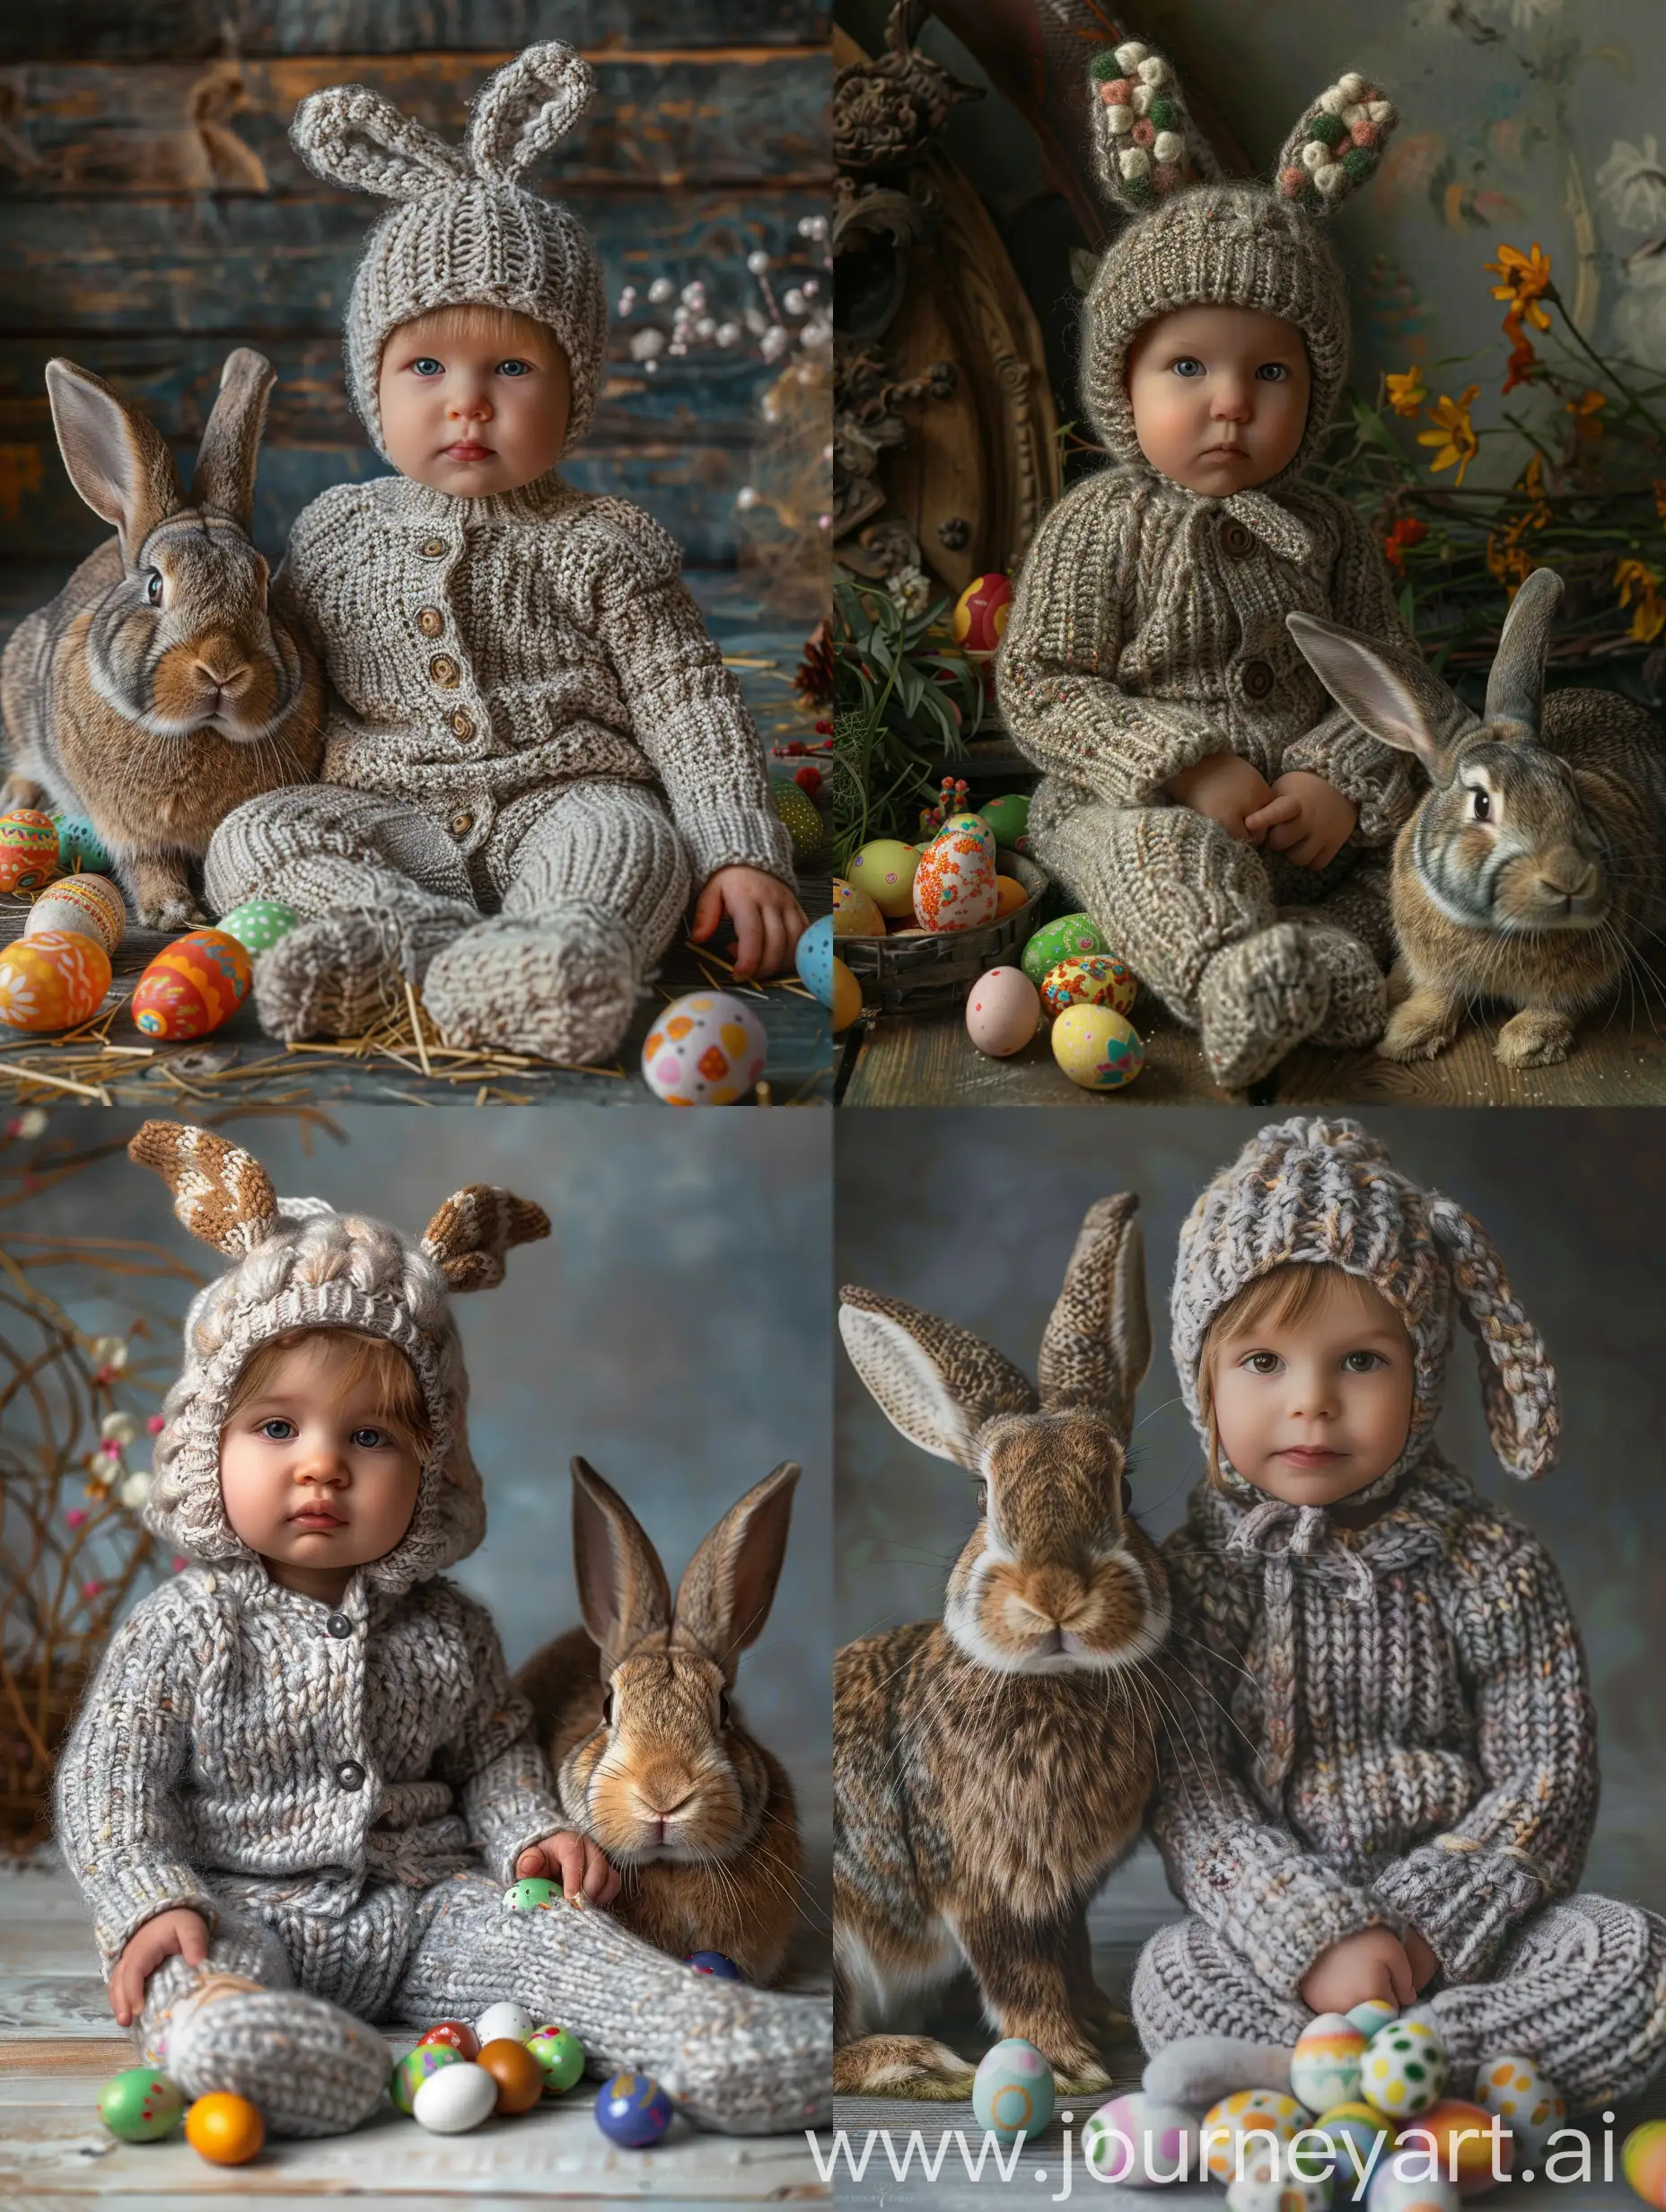 Adorable-Child-in-Bunny-Suit-Poses-with-Easter-Eggs-and-Rabbit